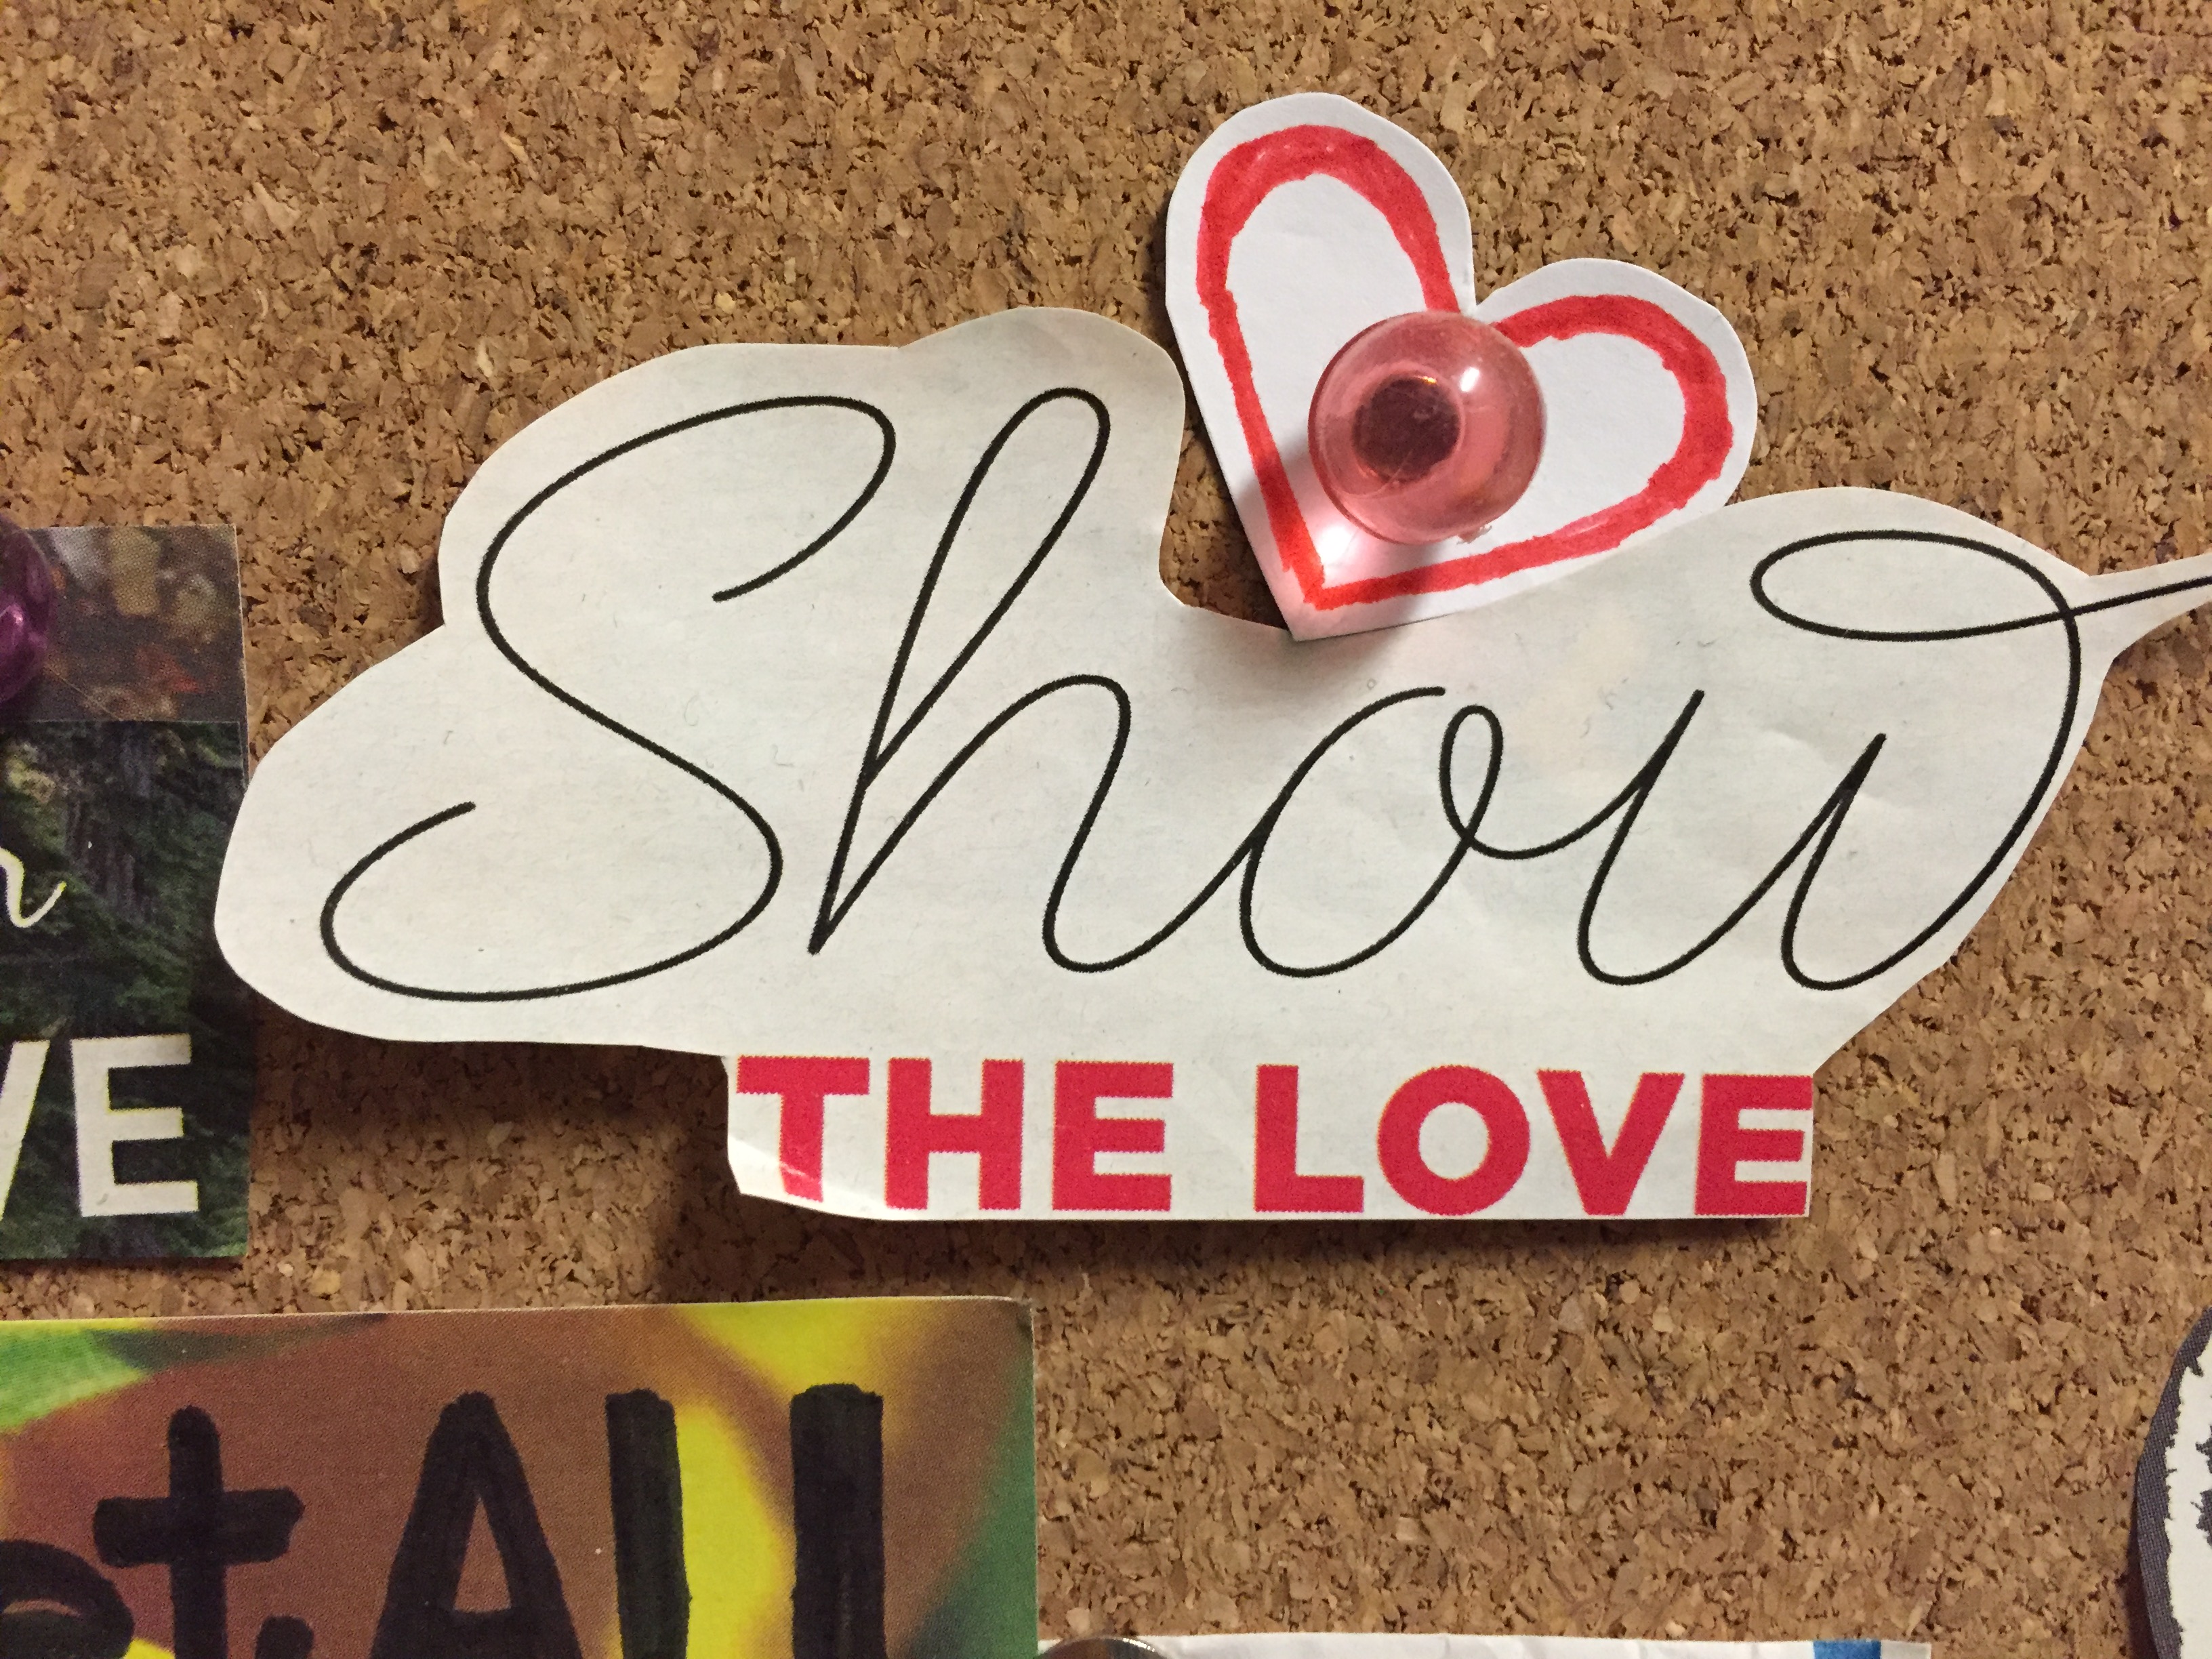 quotation: Show the love